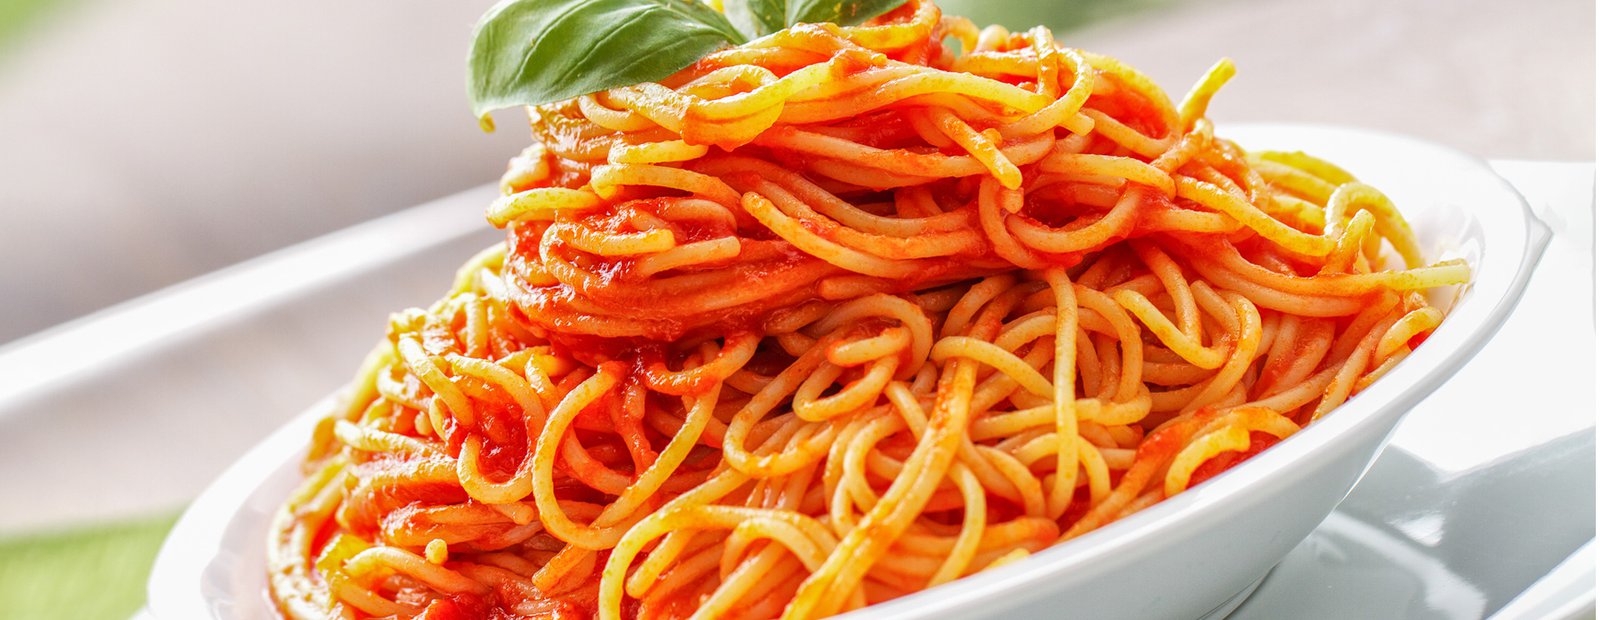 Pasta with tomato sauce: let’s discover spaghetti, once called “maccheroni”, a simple recipe that has conquered the world